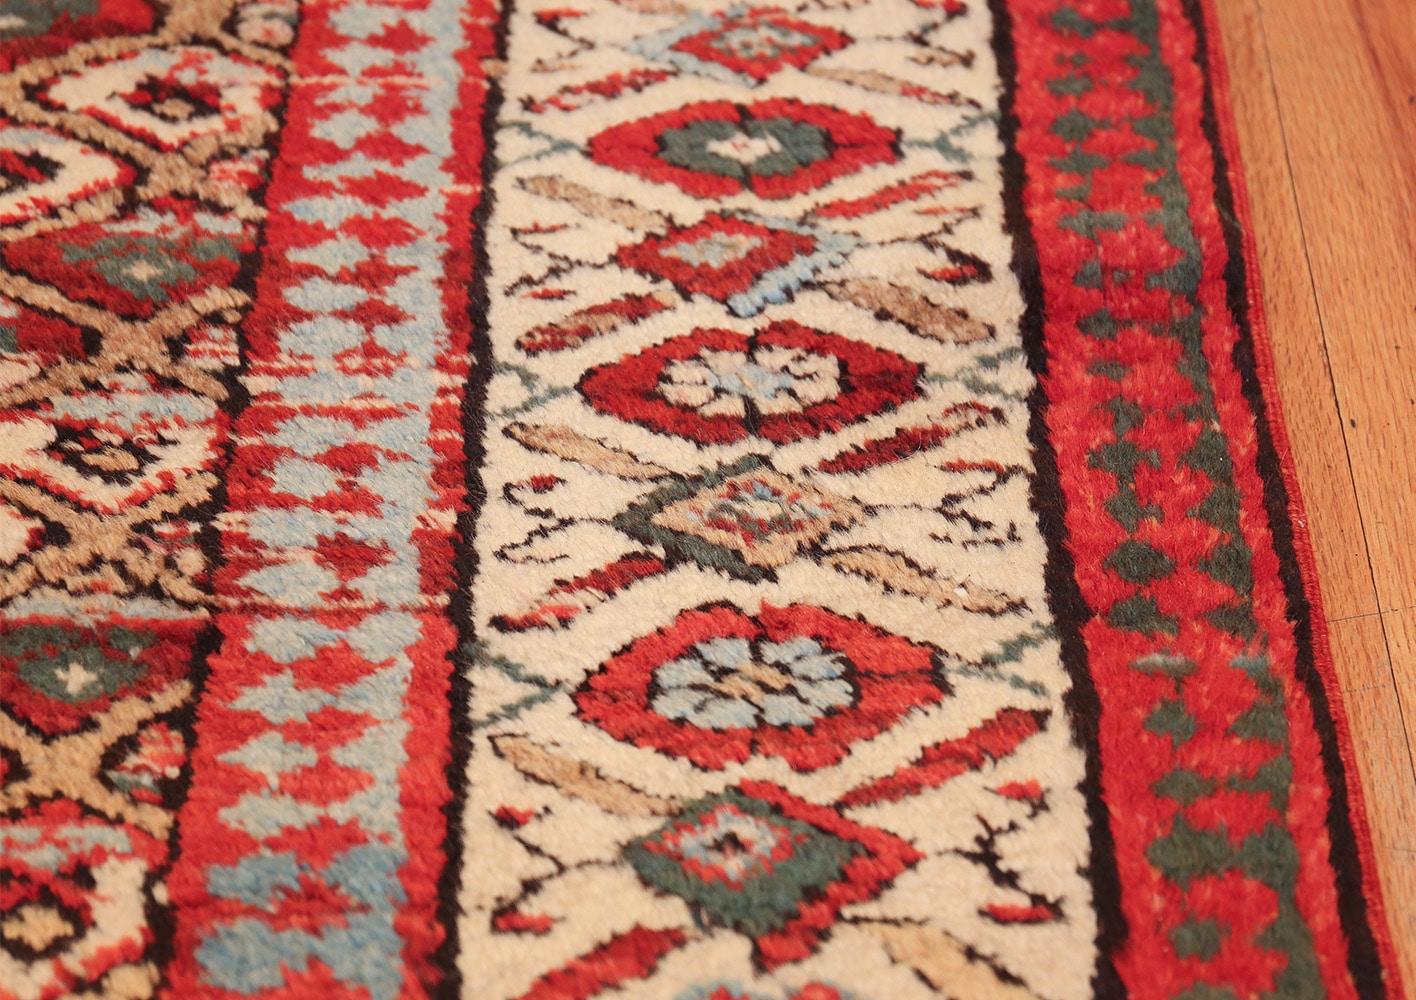 Antique Tribal Persian Kurdish Runner Rug, Country of Origin / rug type: Persian rug, Circa date: 1900. Size: 3 ft 5 in x 11 ft 10 in (1.04 m x 3.61 m)

